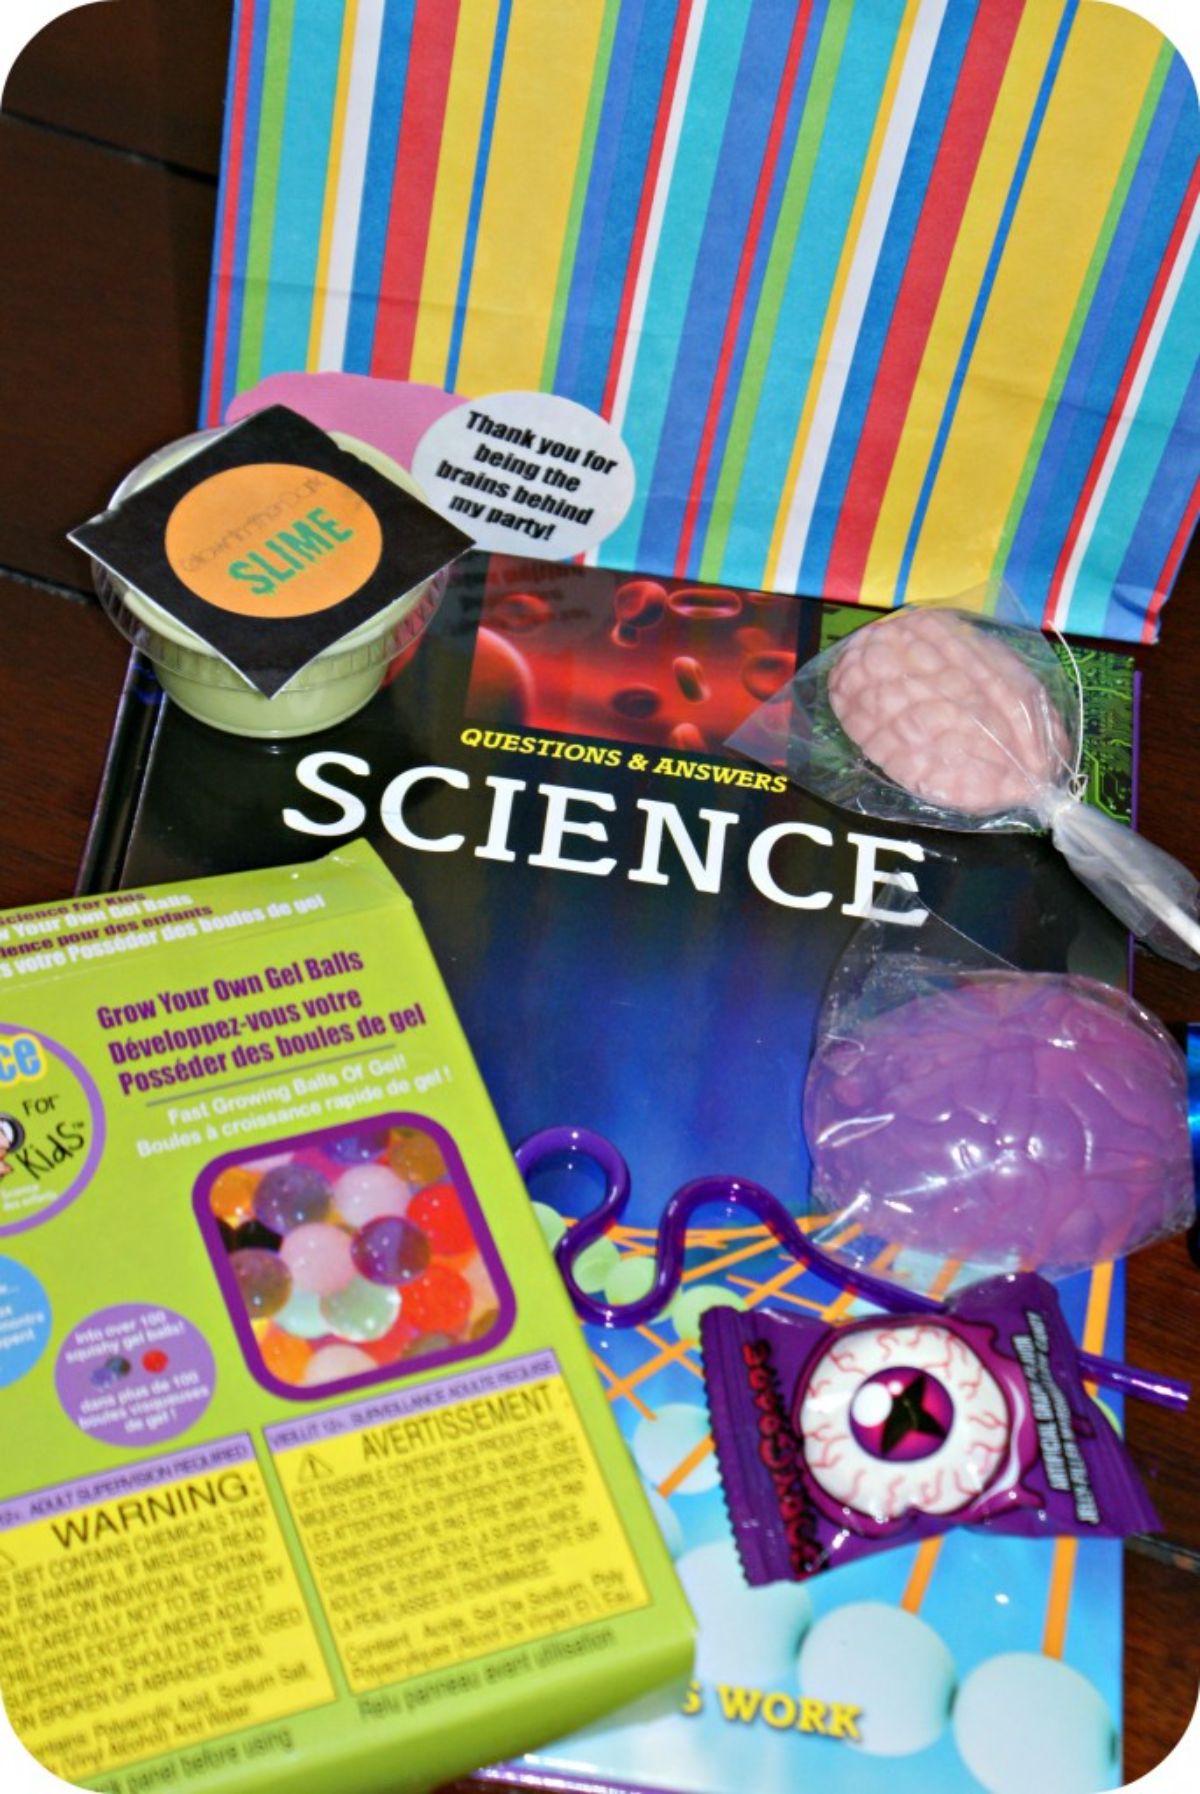 a striped paper bag sits on the table, In front is a selection of science-themes items